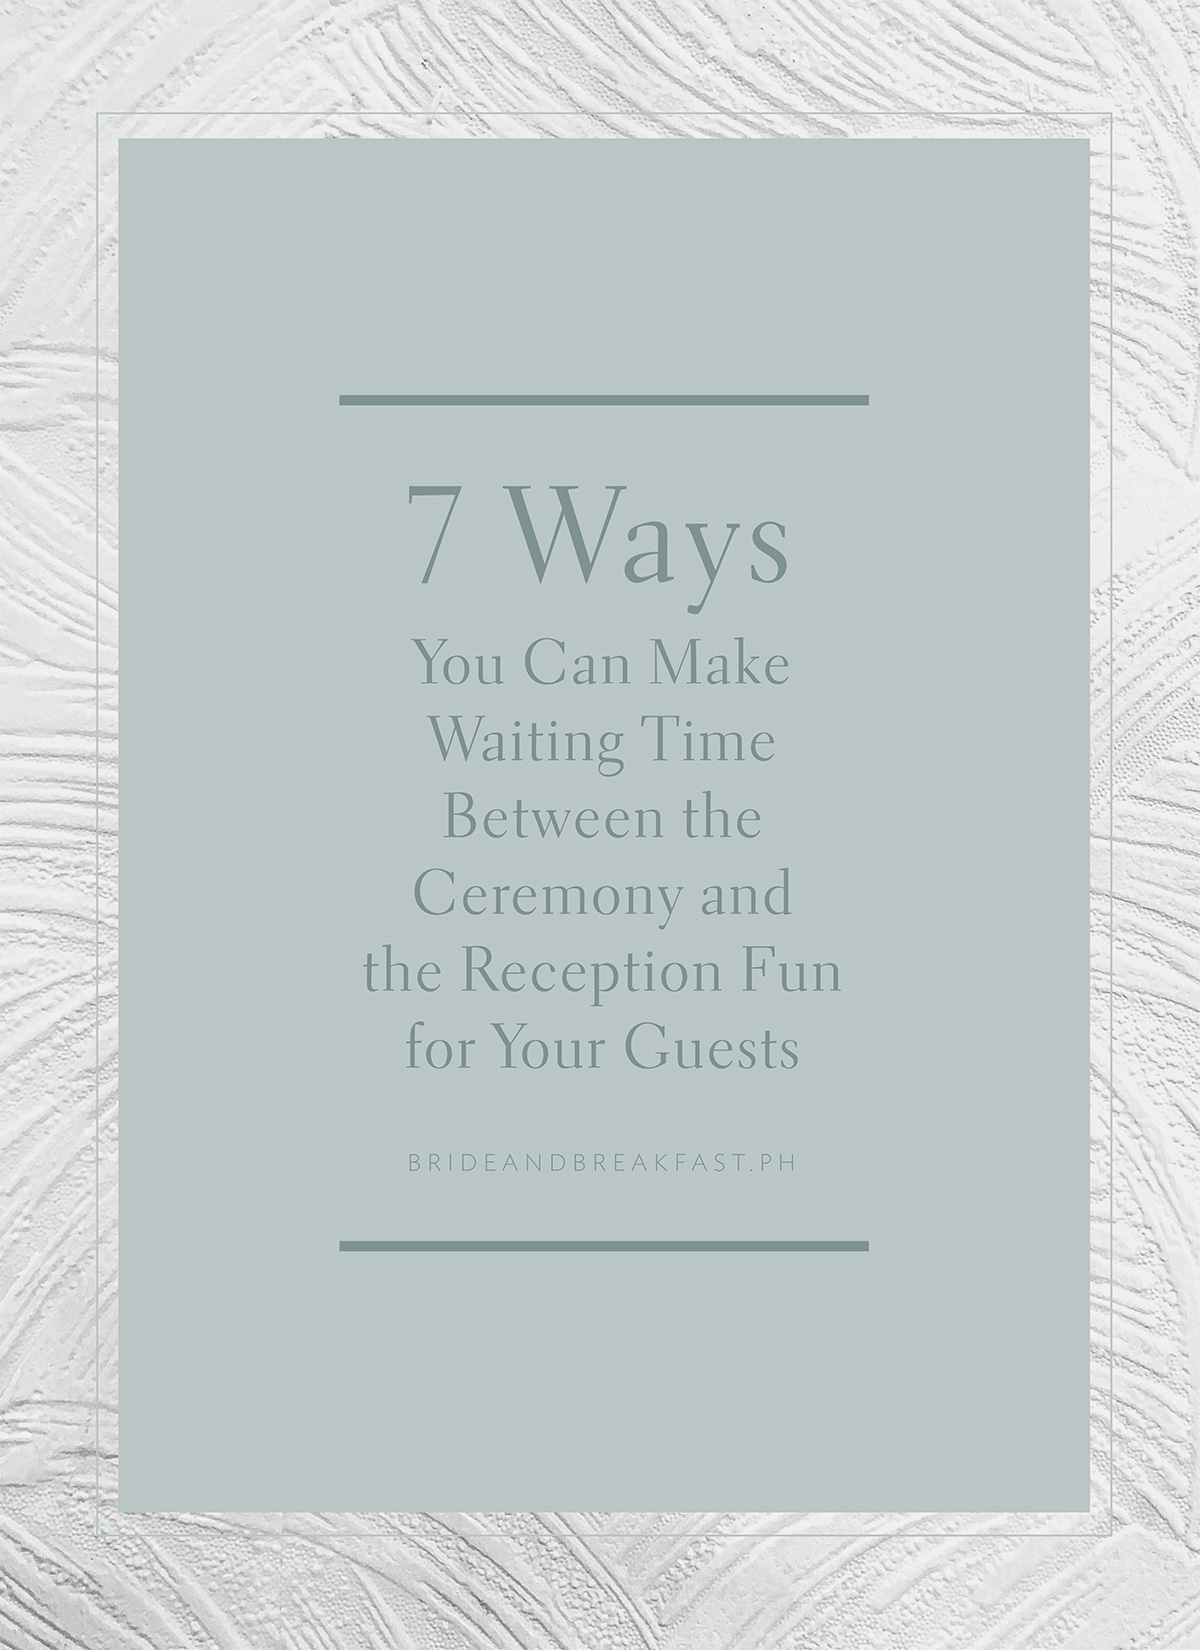 7 Ways You Can Make Waiting Time Between the Ceremony and the Reception Fun for Your Guests